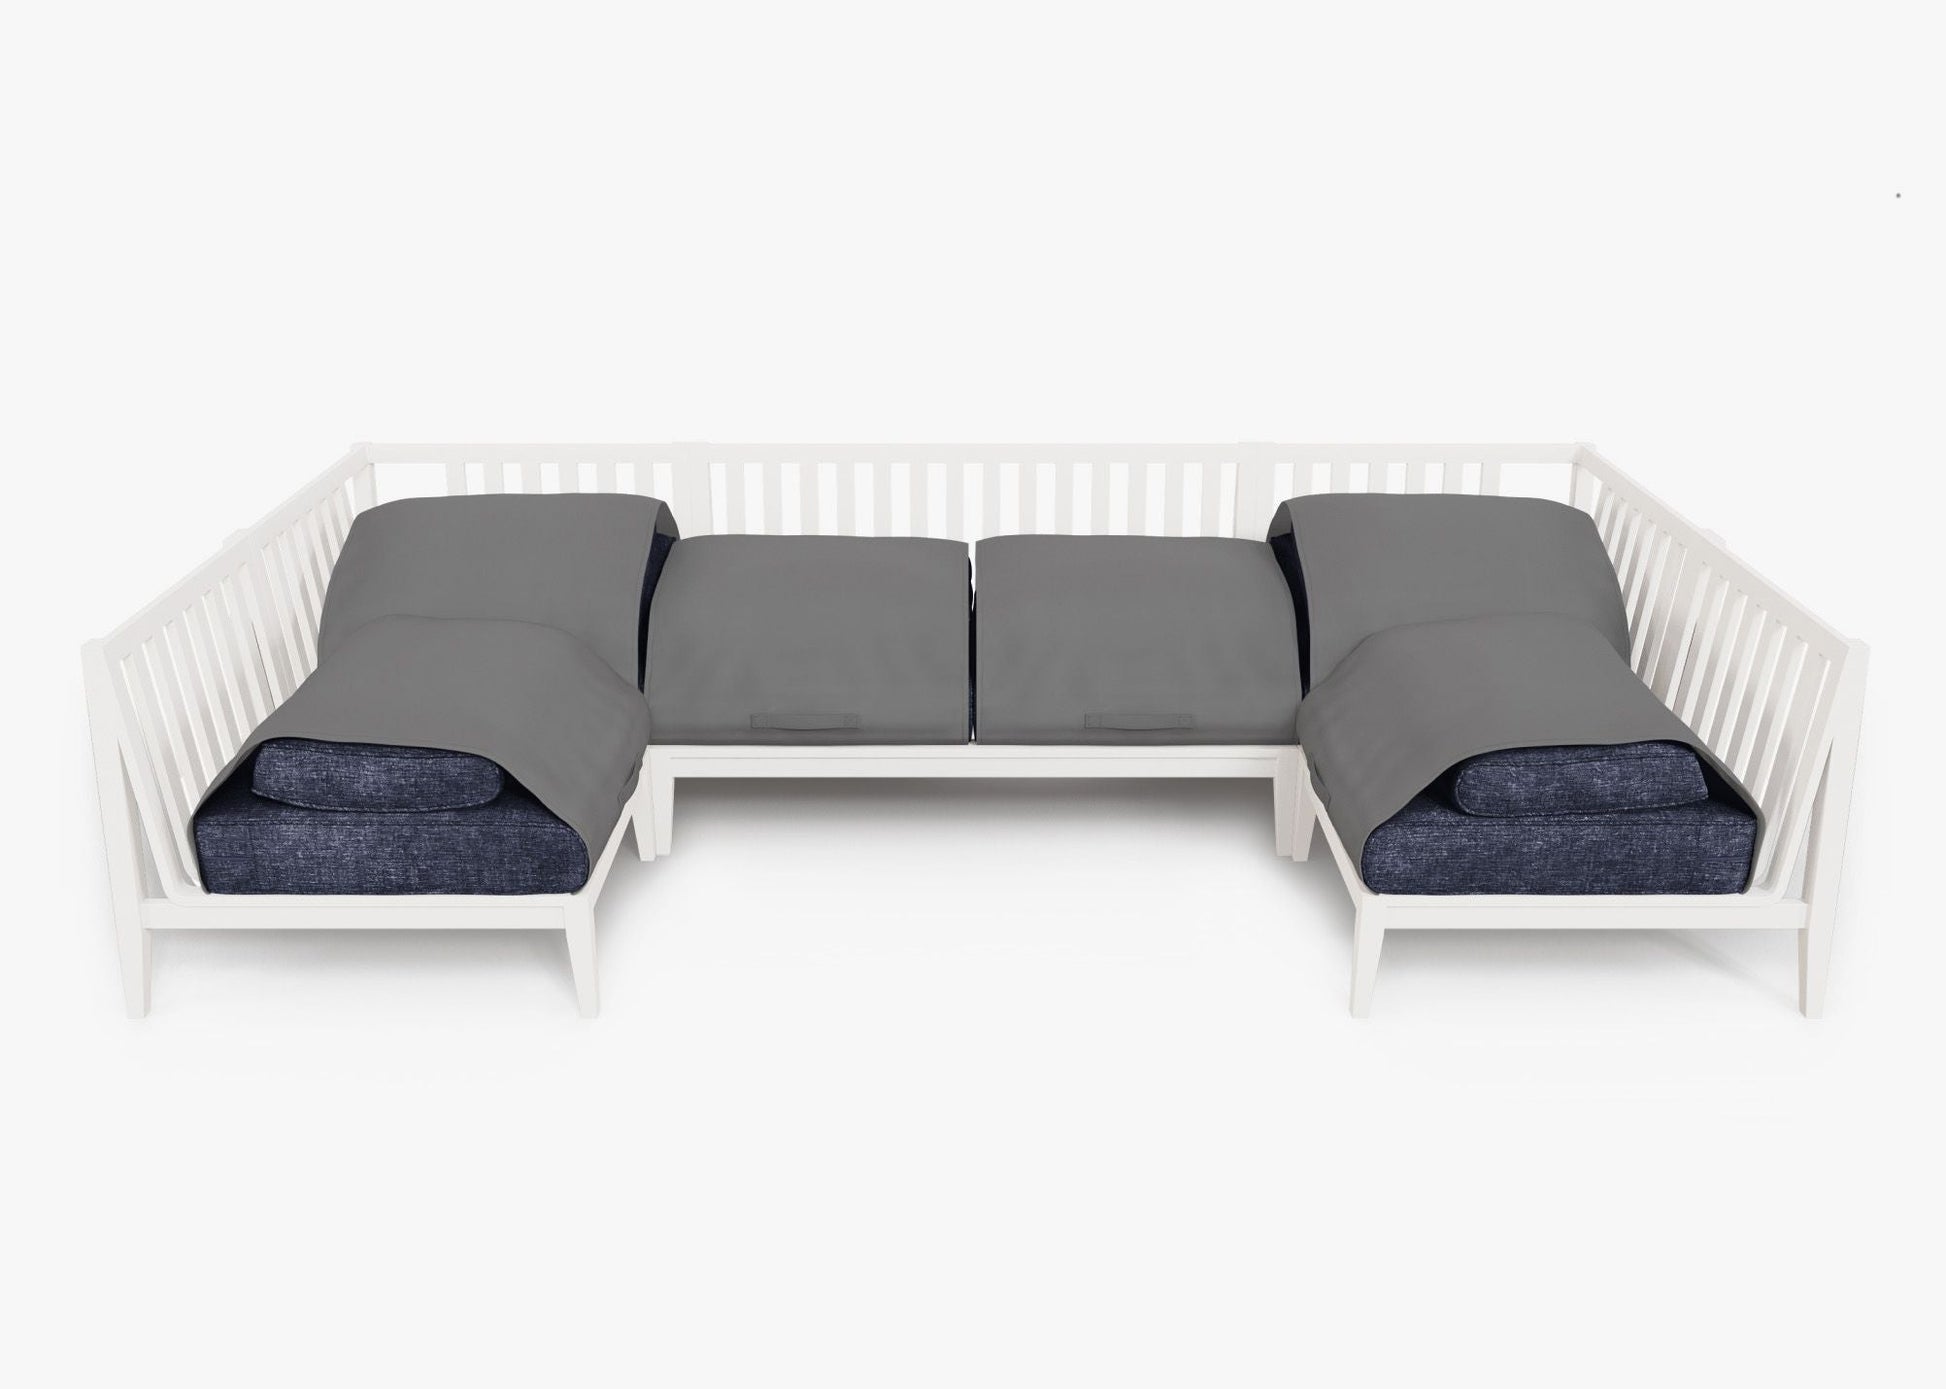 Live Outer 127" x 64" White Aluminum Outdoor U Sectional 6-Seat With Deep Sea Navy Cushion